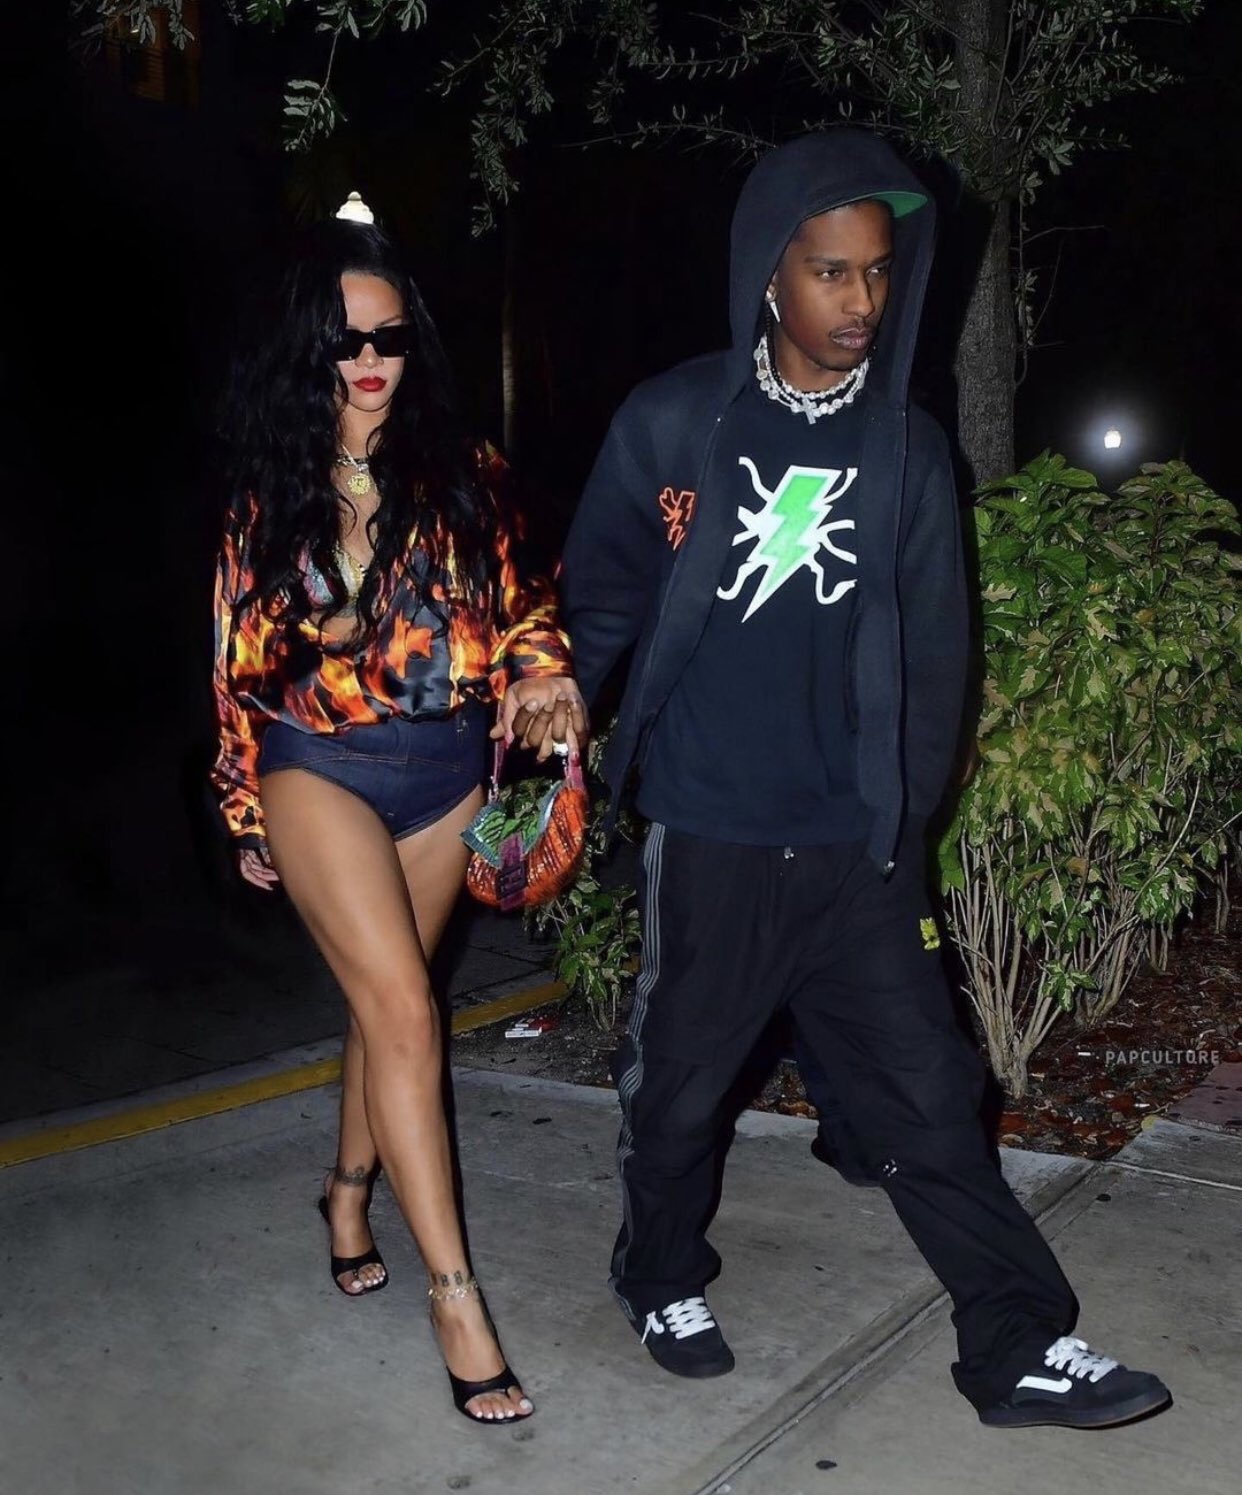 rihanna-wore-denim-shorts-with-asap-rocky-in-miami